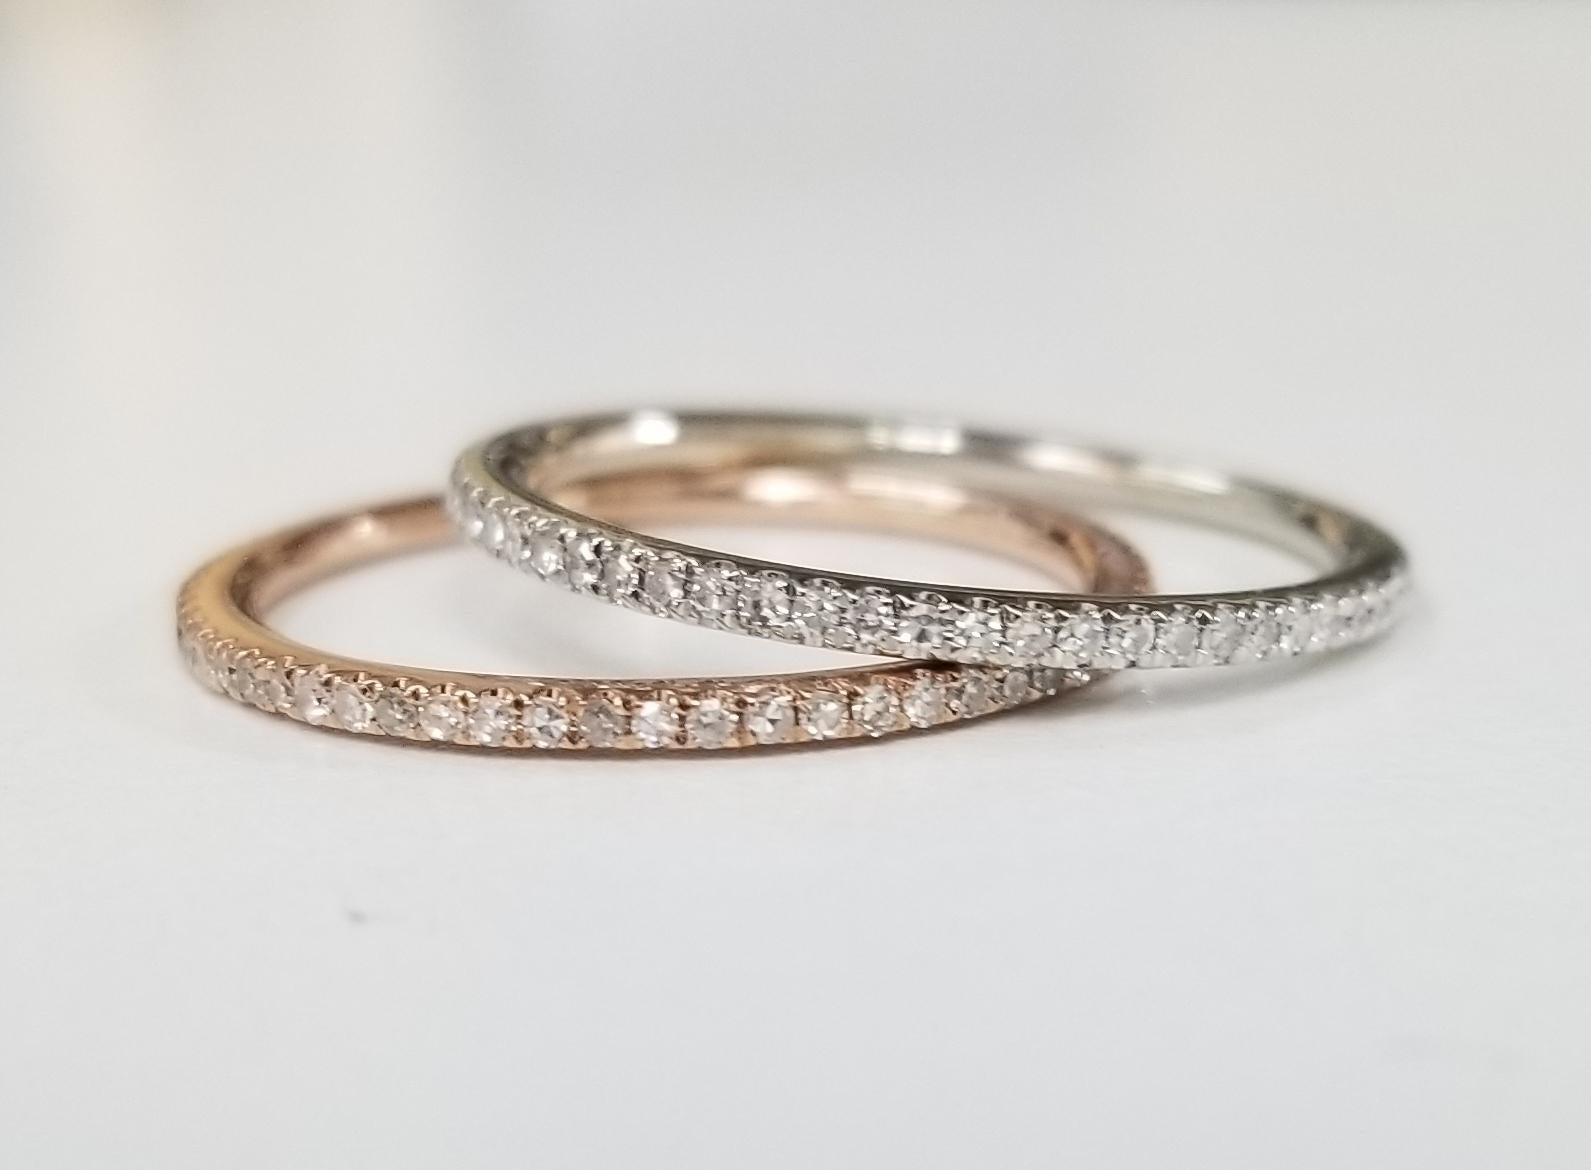 Set of 2 14k white gold diamond stack able eternity ring with 60 round single cut diamonds micro pave'  .60pts., size 8